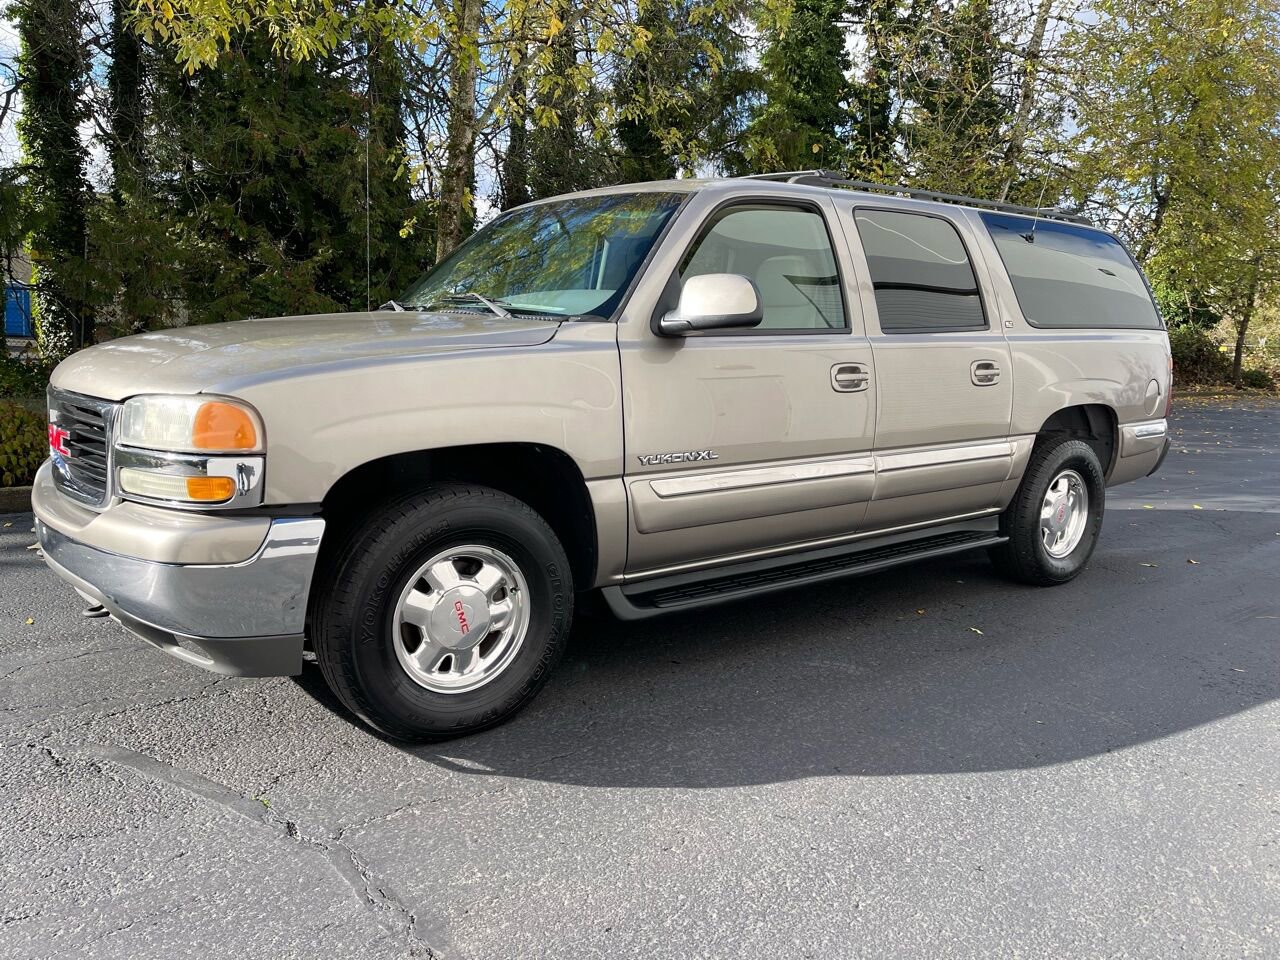 Used 2001 GMC Yukon XL for Sale Right Now - Autotrader